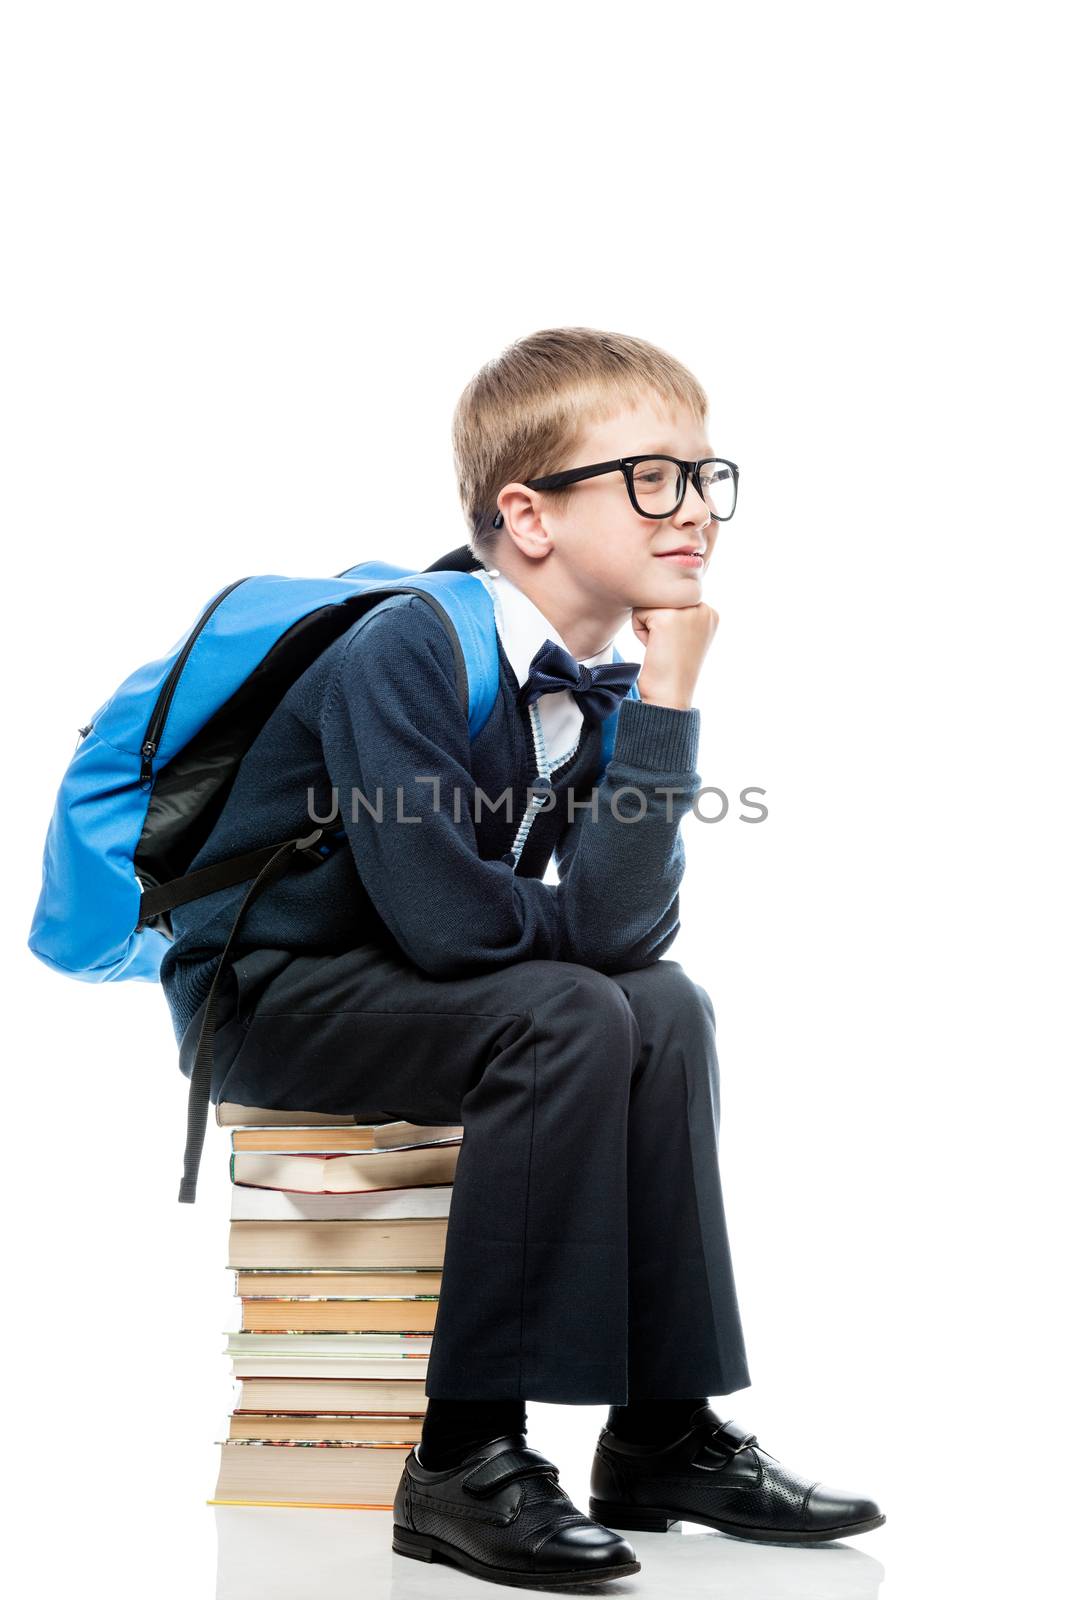 thoughtful schoolboy sitting on a pile of books on a white backg by kosmsos111